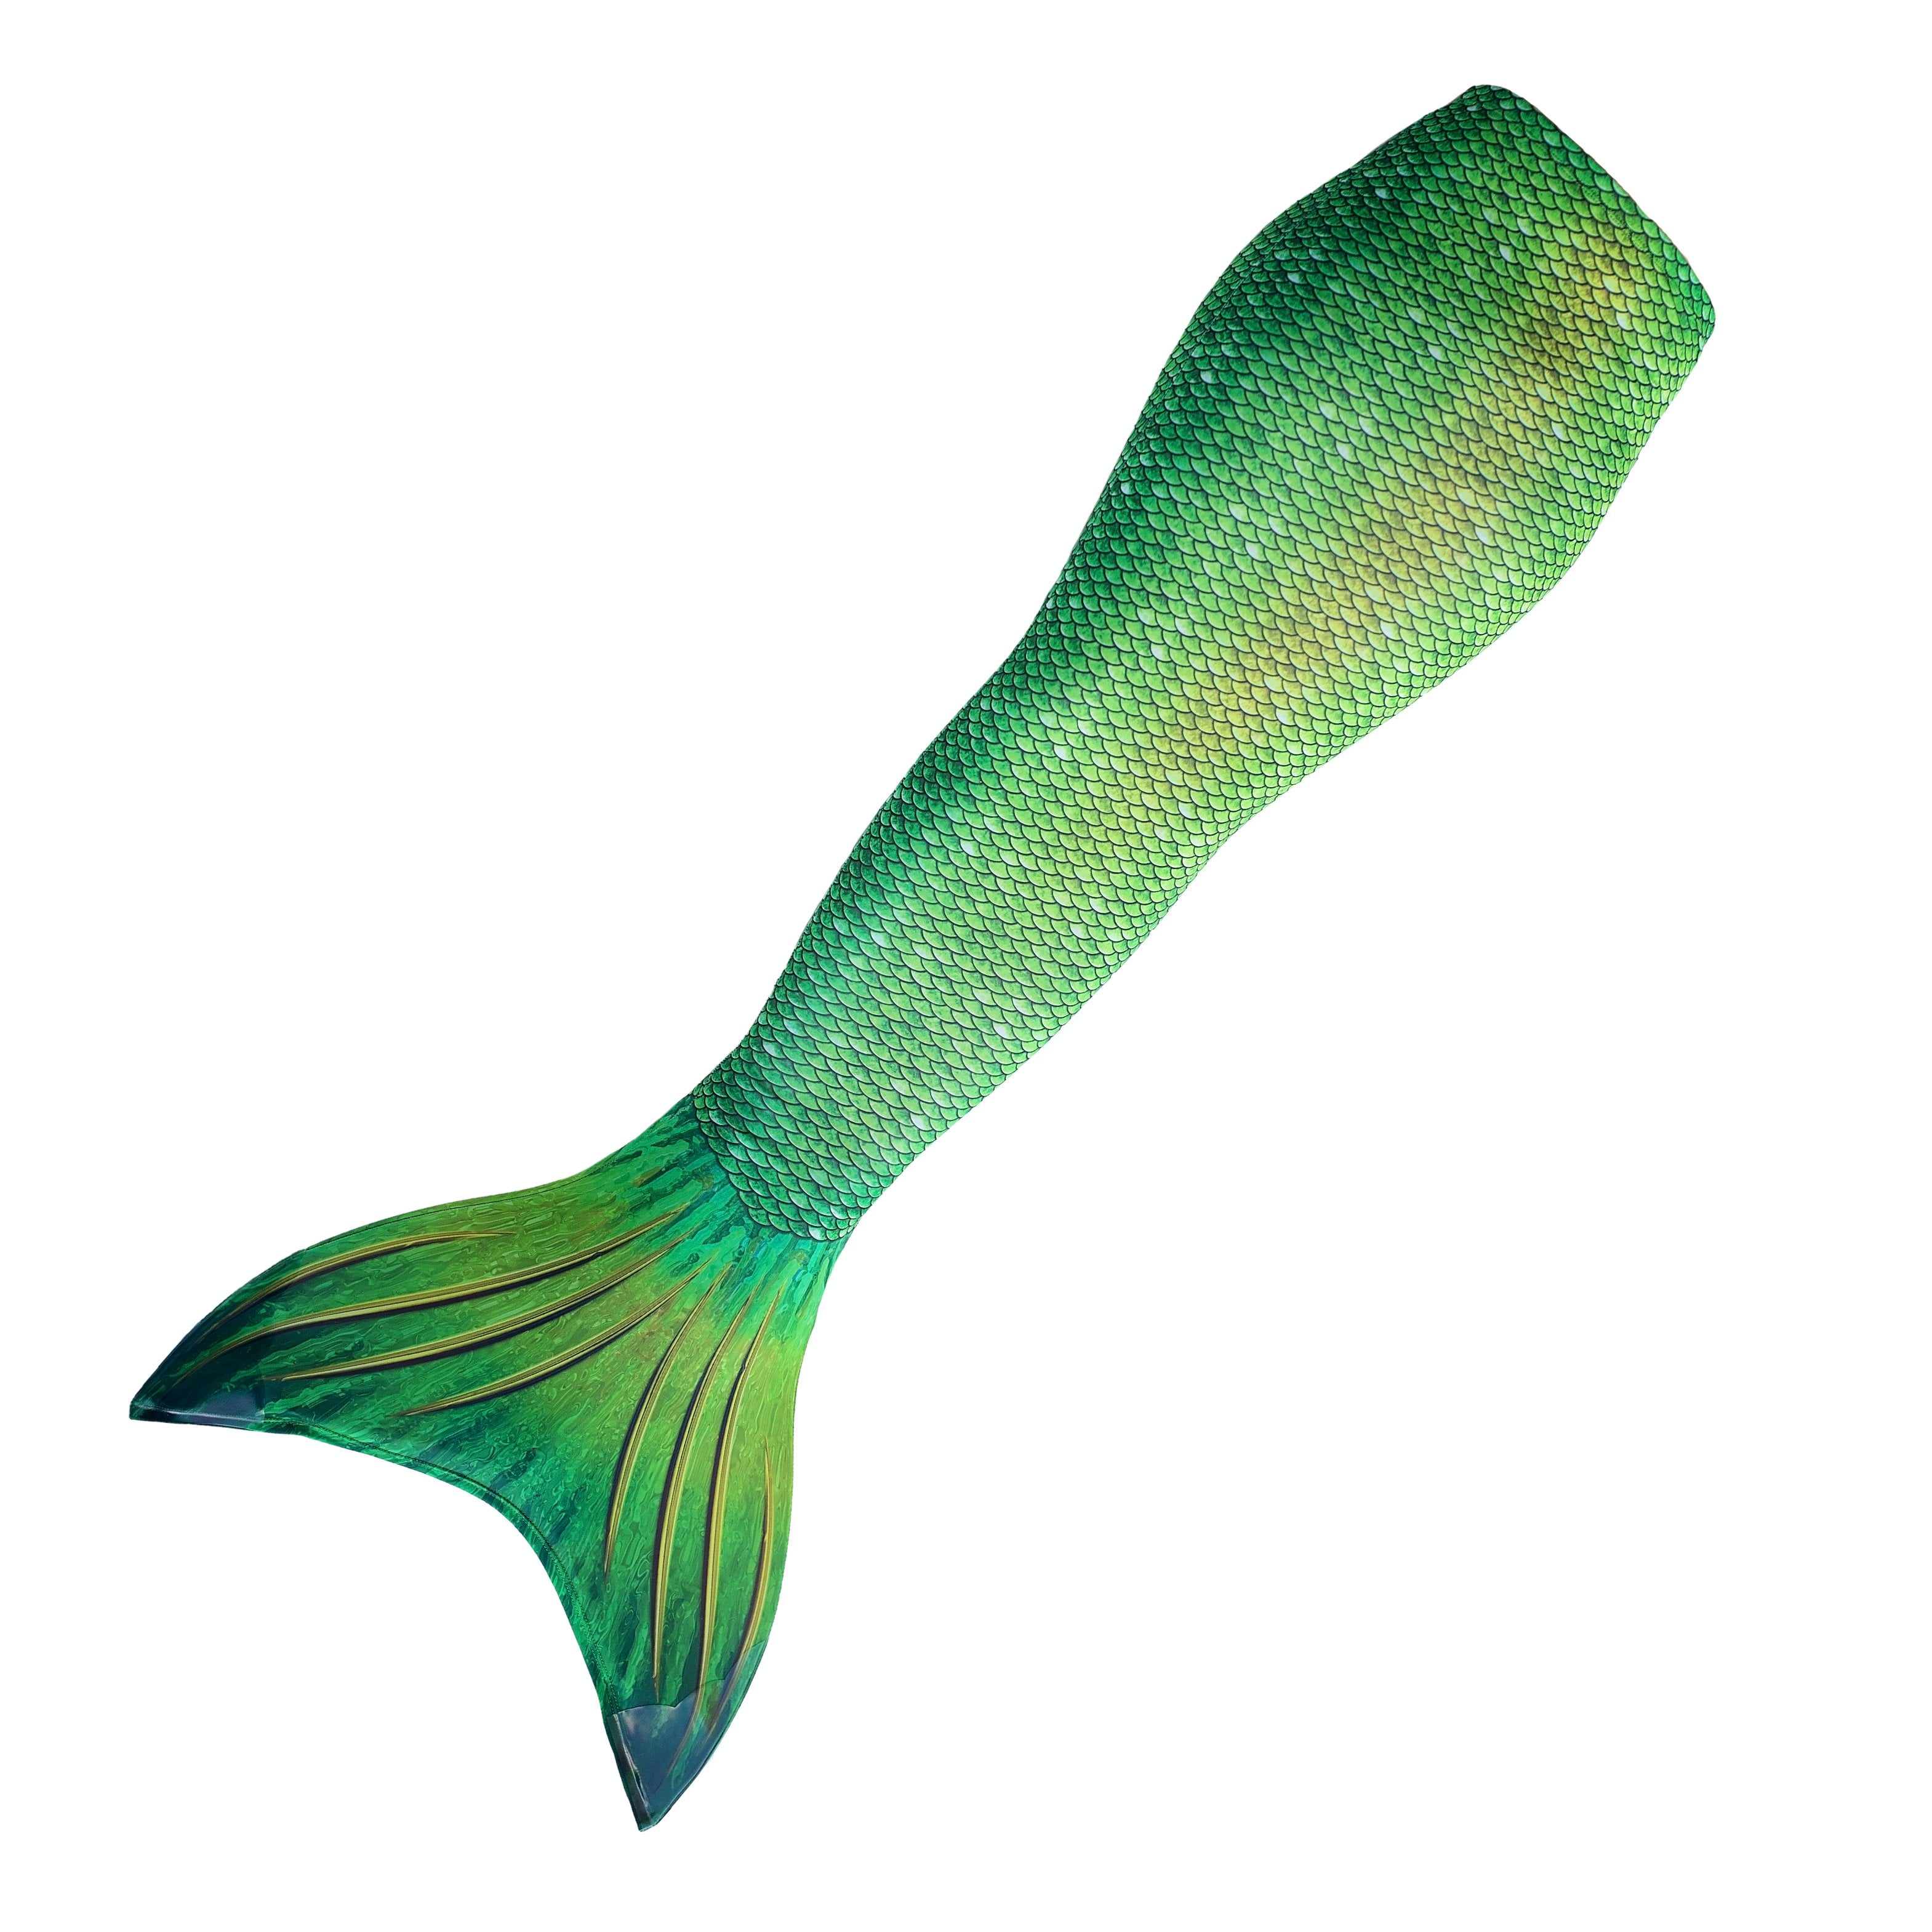 Solar Mermaid Tails for girls Compression Sleeves Mermaid Arm Sleeves Mermaid tails sleeves